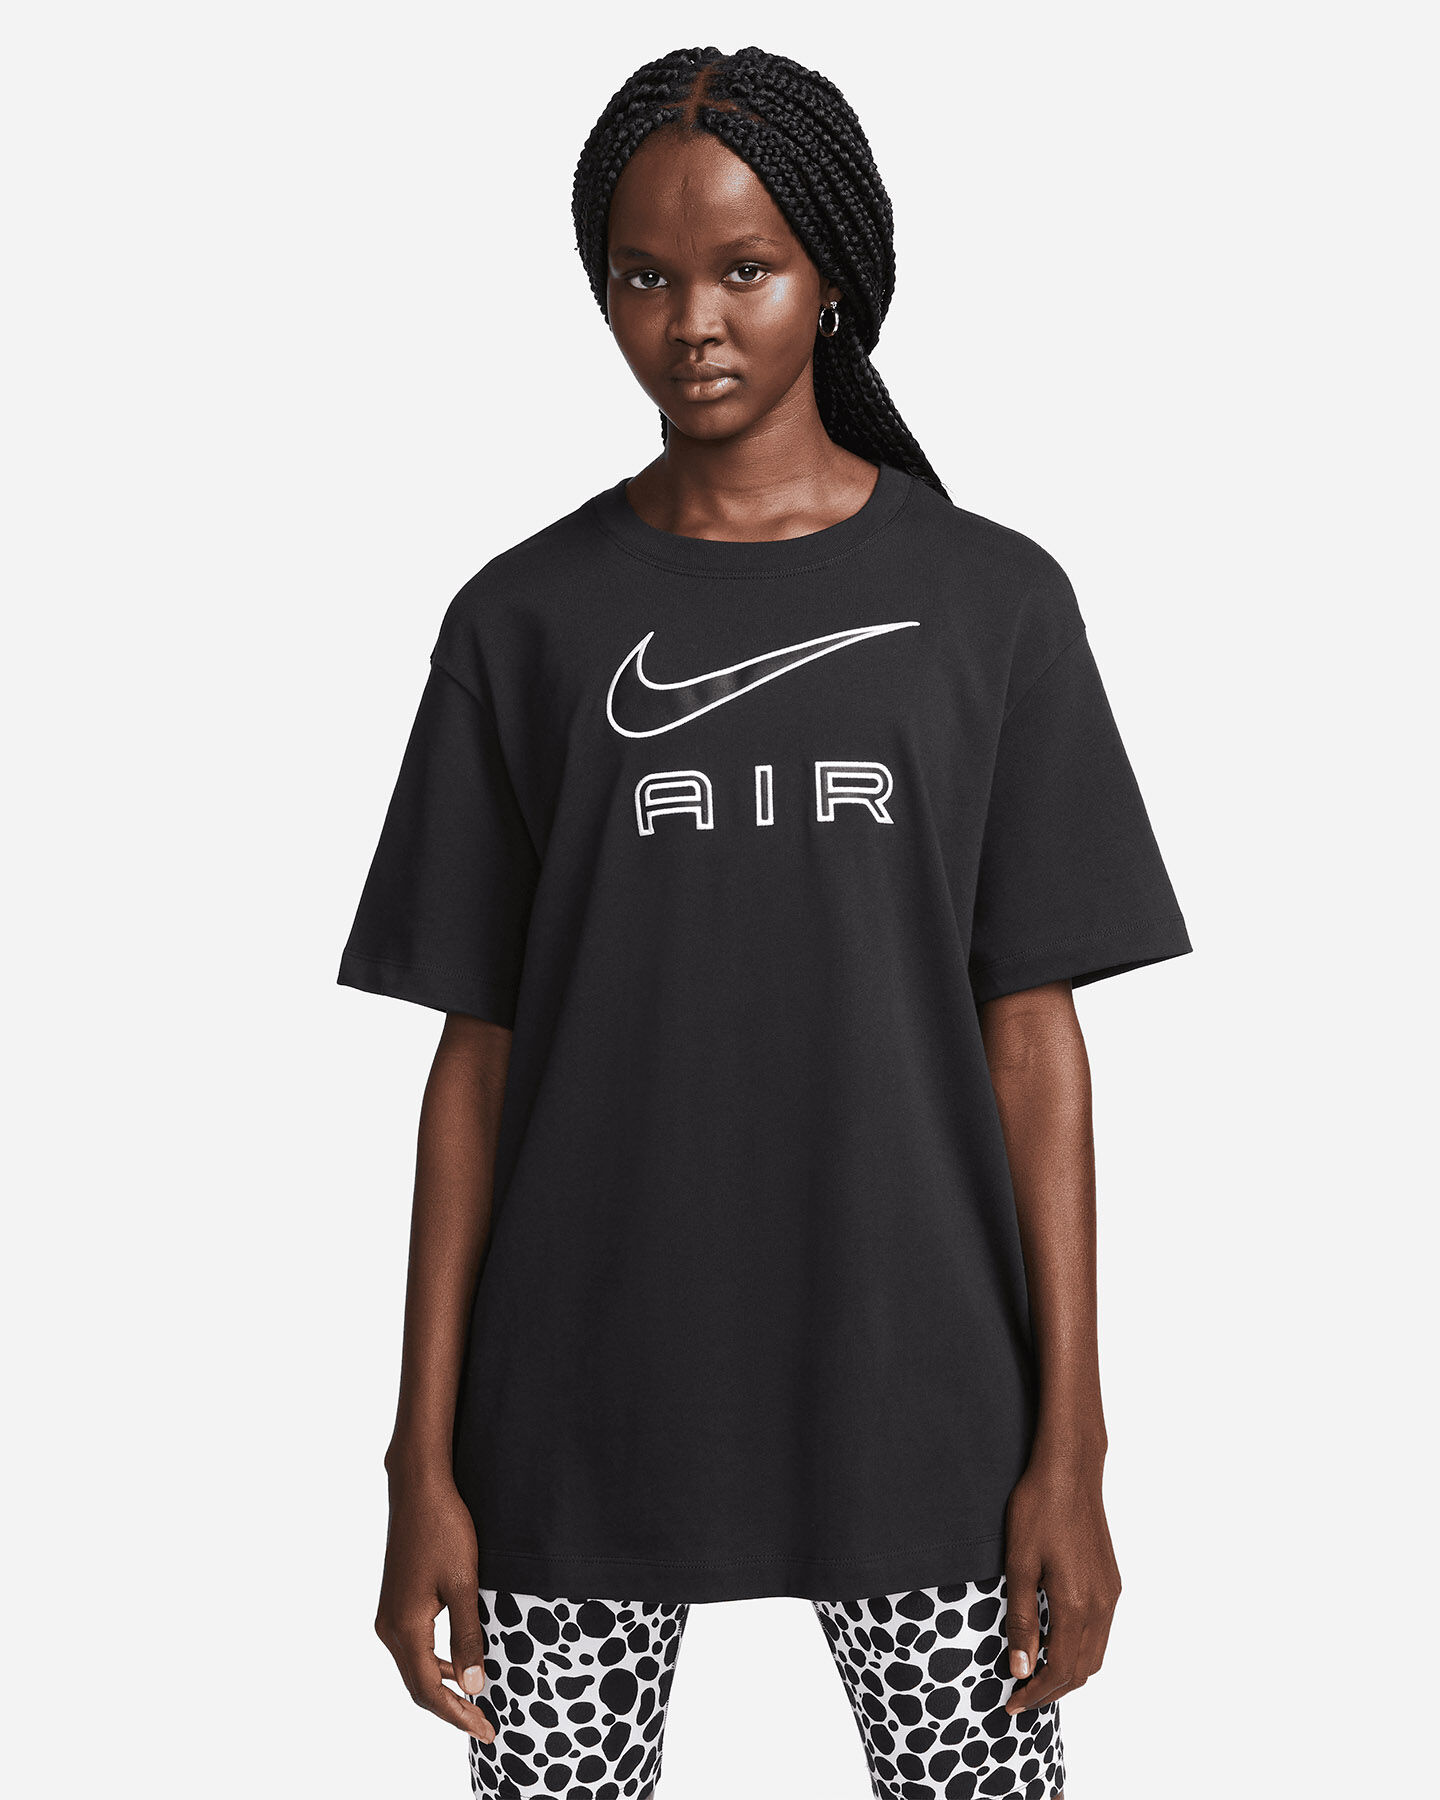  T-Shirt NIKE AIR BLOGO W S5458093|010|XS scatto 0